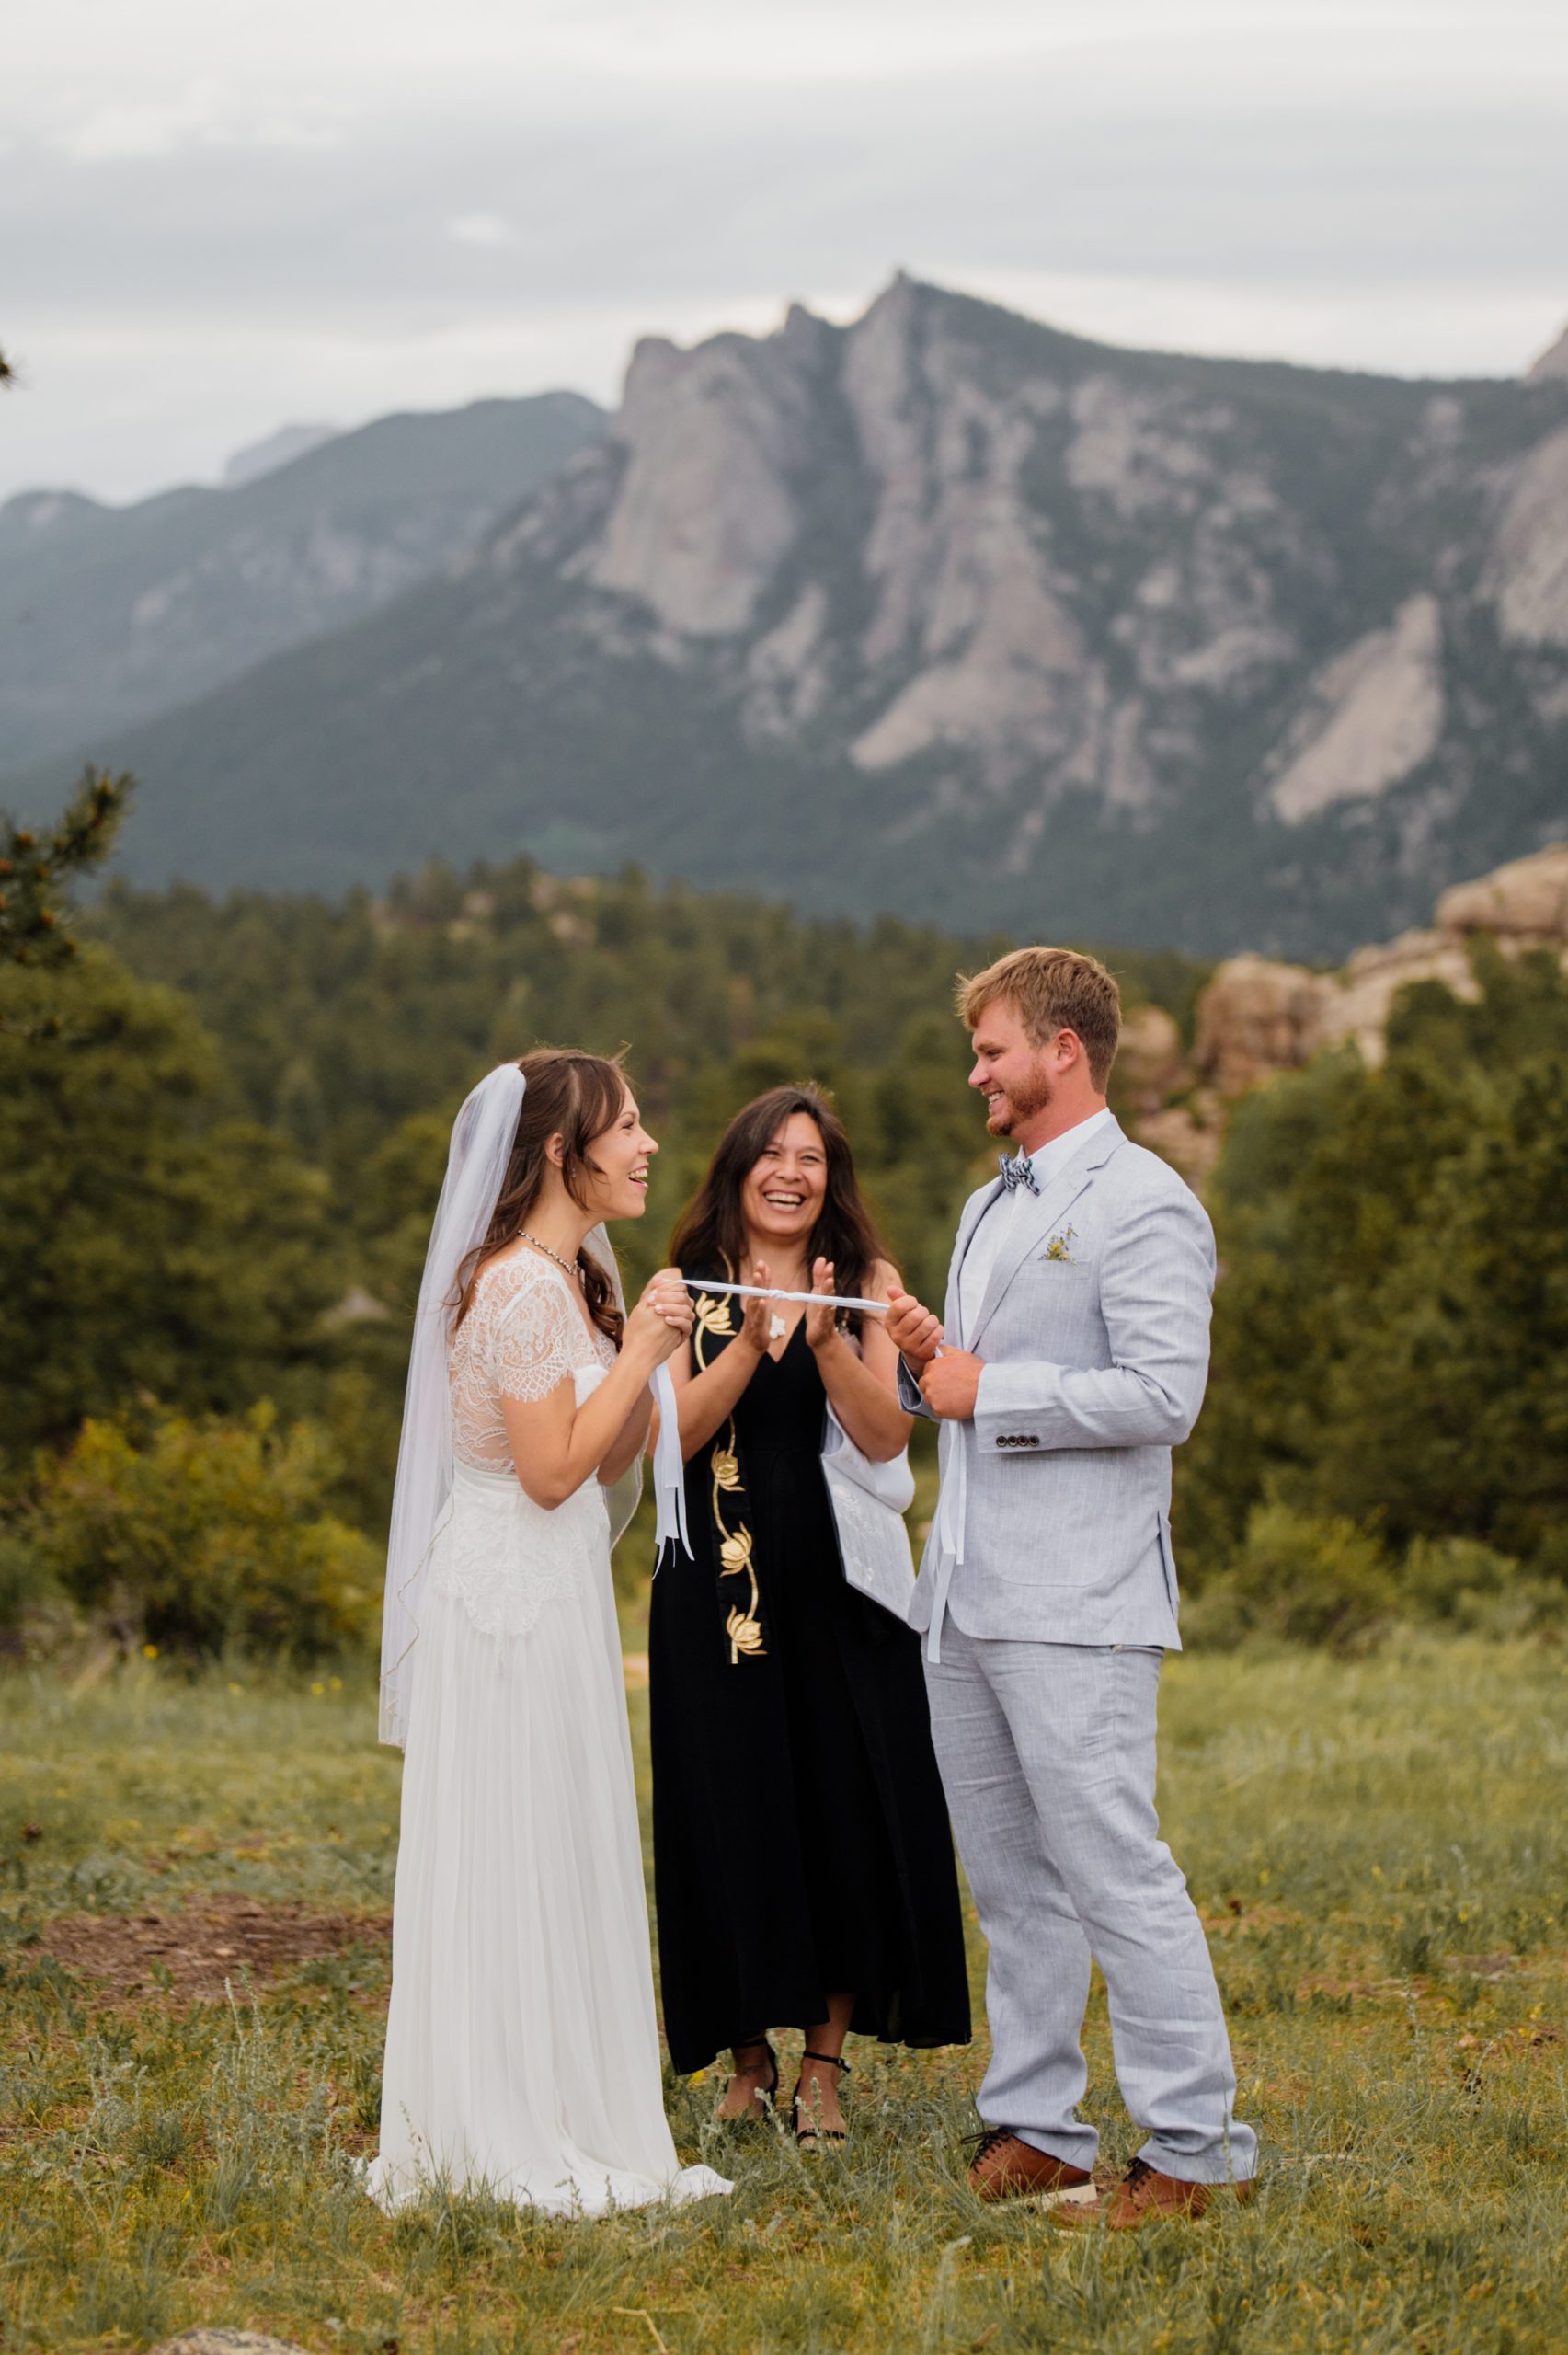 Another shot of the bride and groom smiling during their elopement ceremony at Knoll Willows in Estes Park.